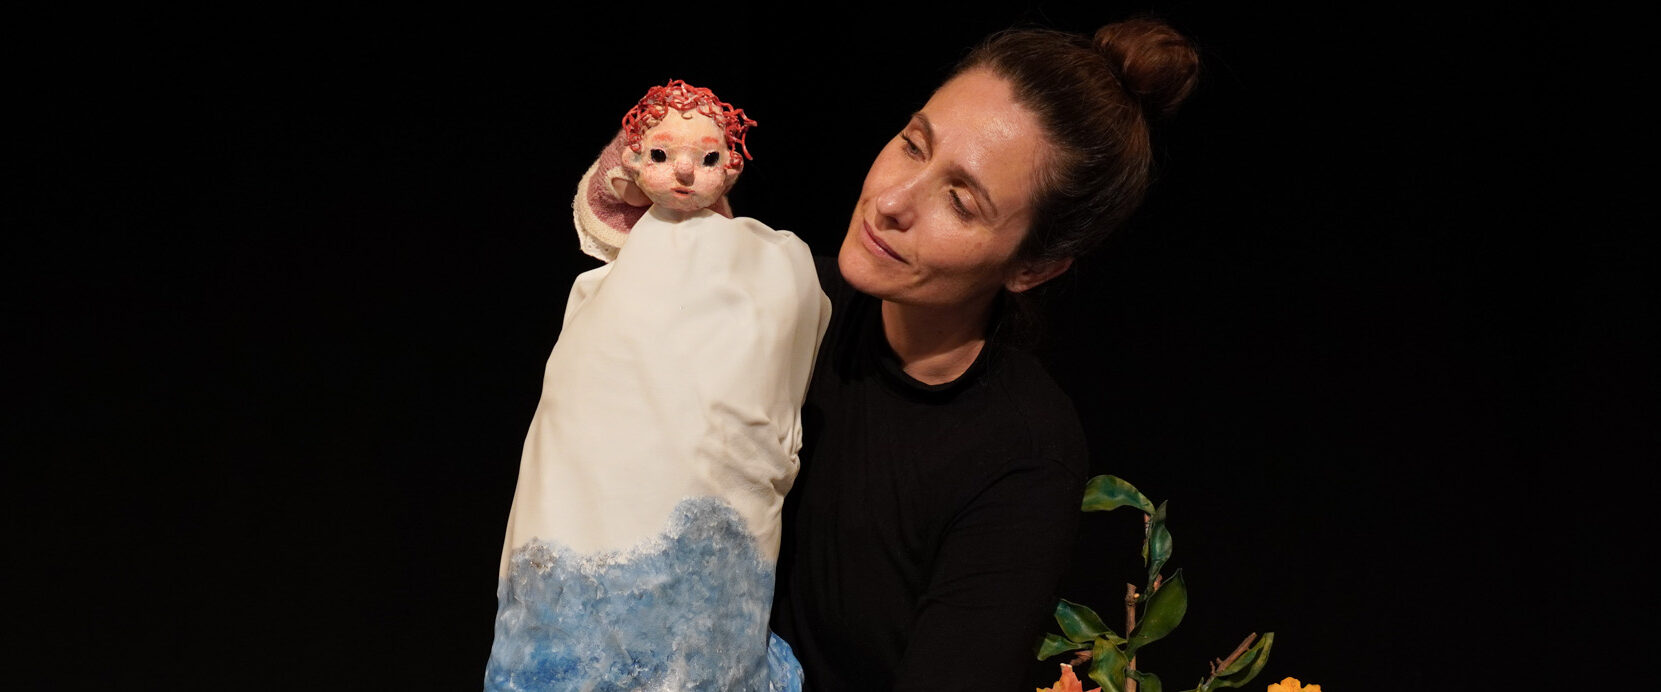 A warm and musical puppet show for the little ones